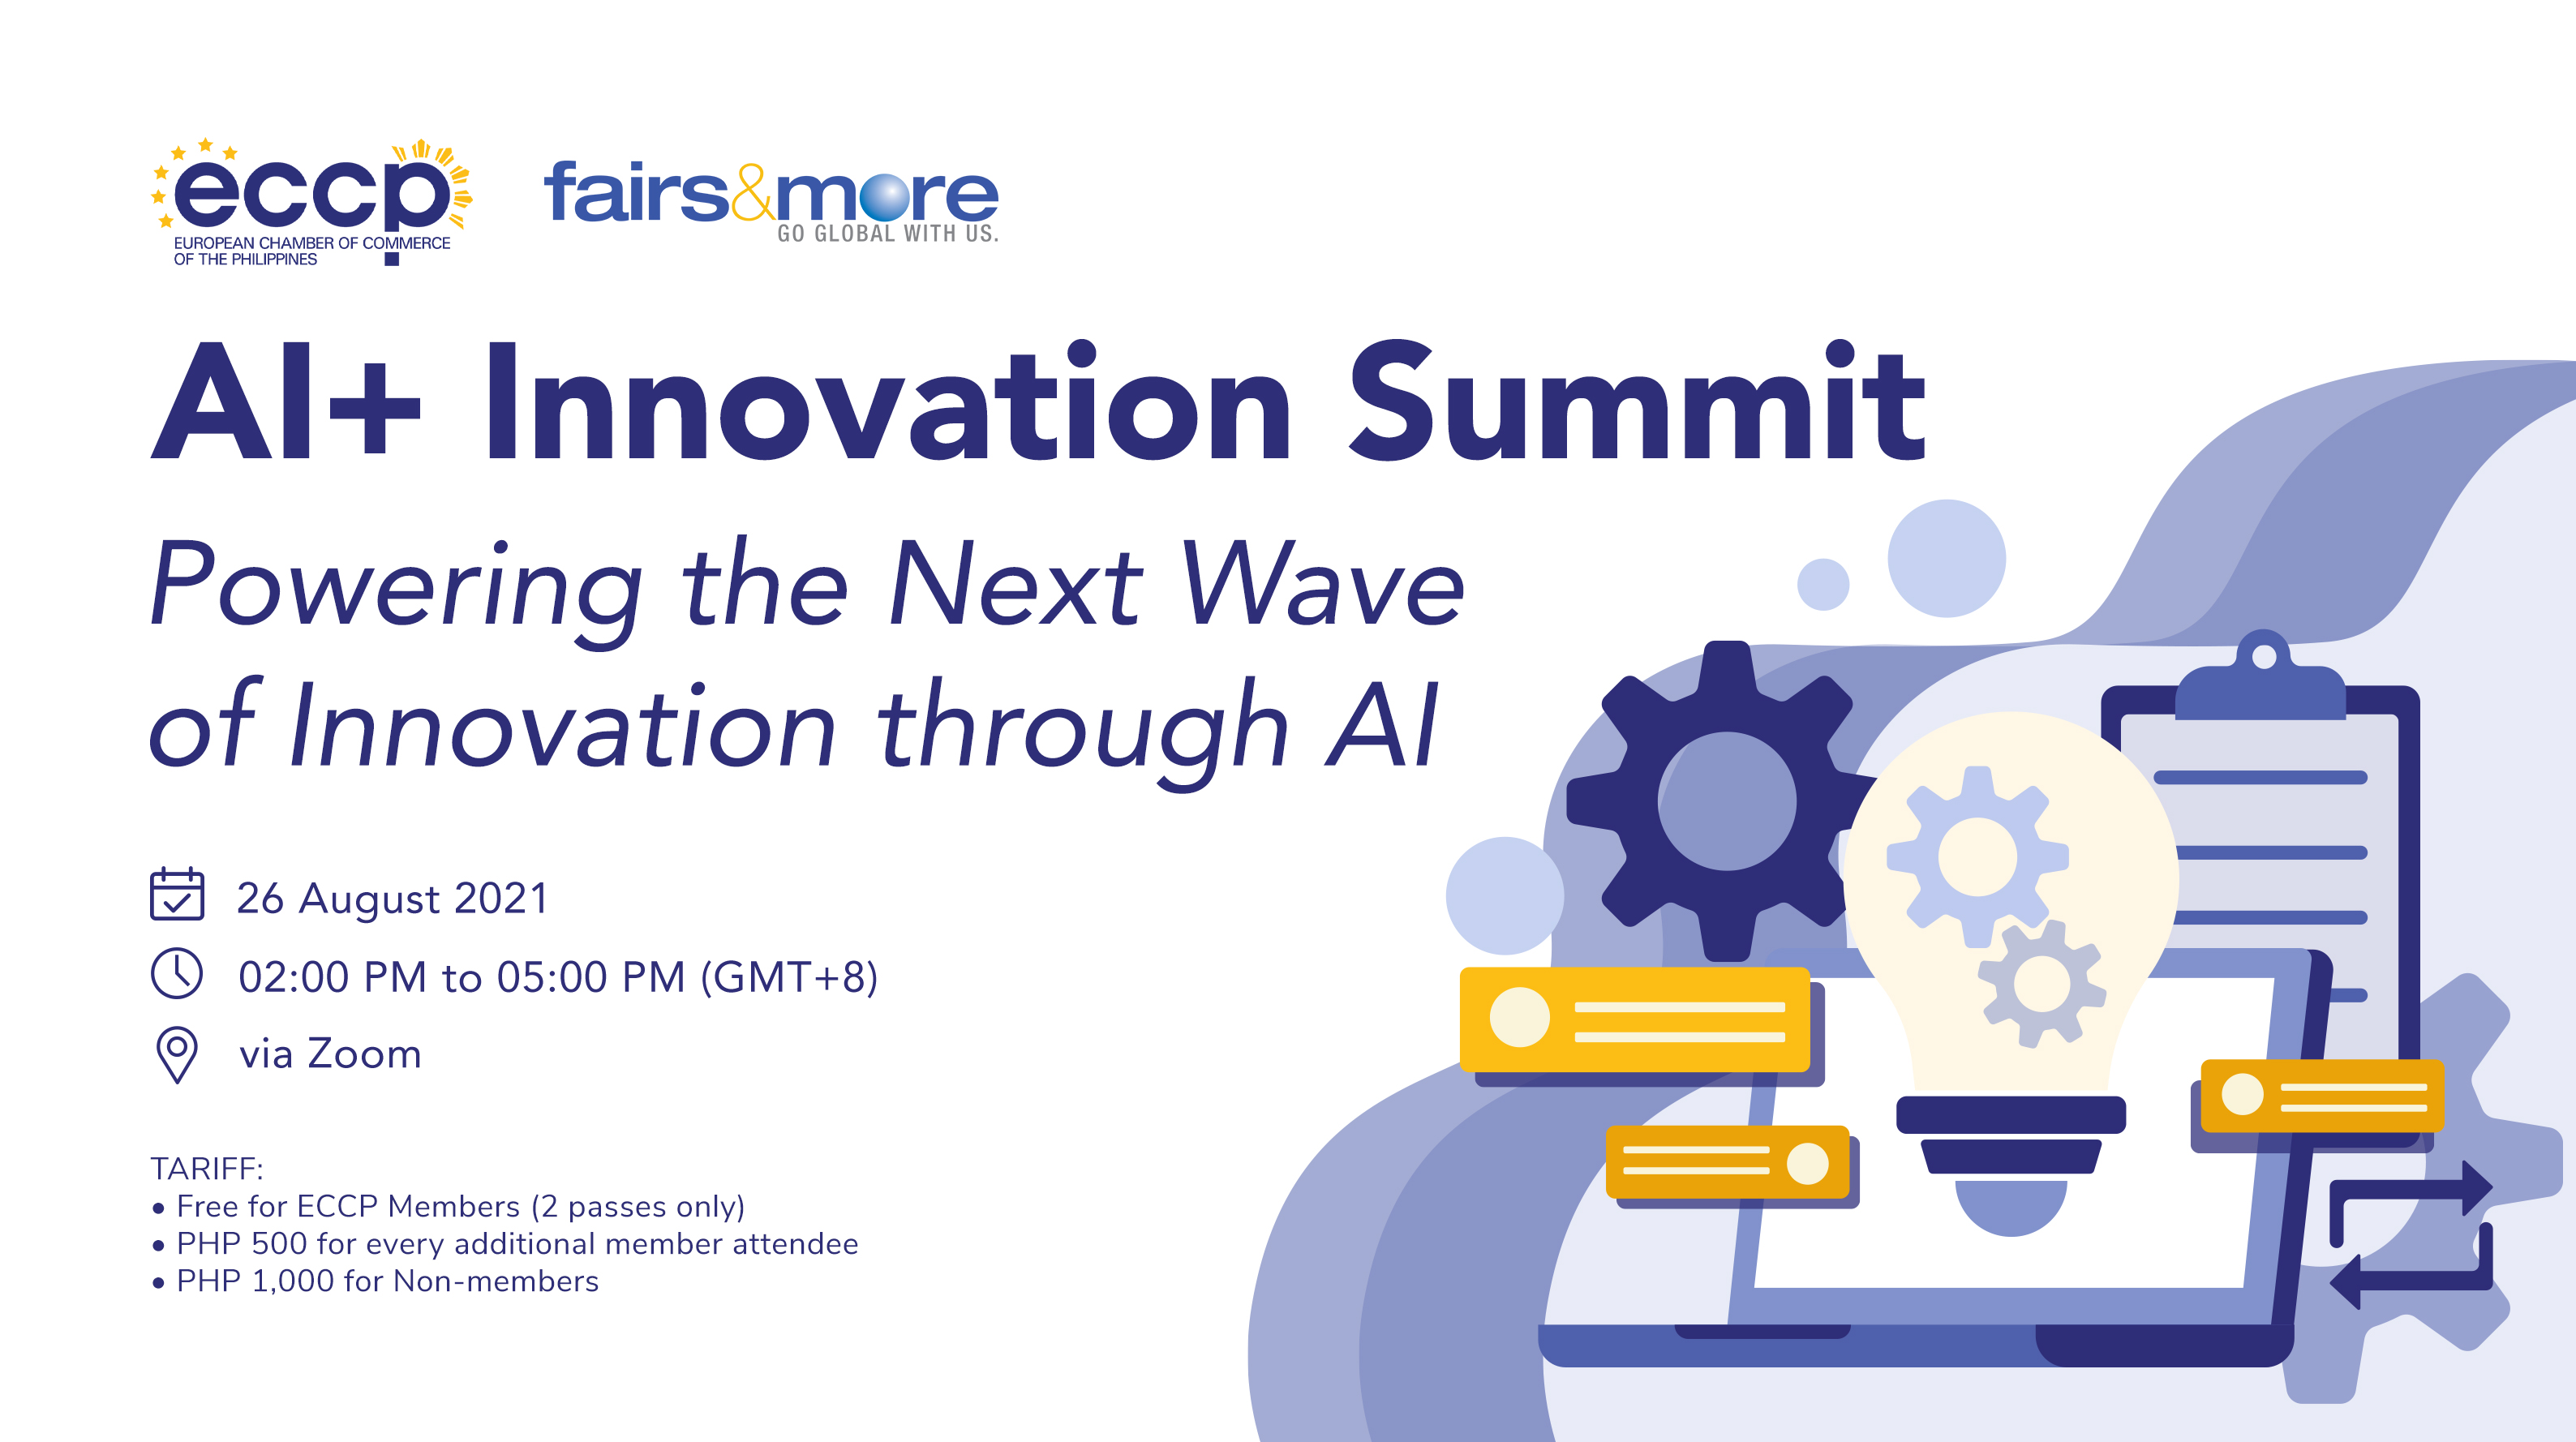 AI + Innovation Summit Powering the Next Wave of Innovation through AI